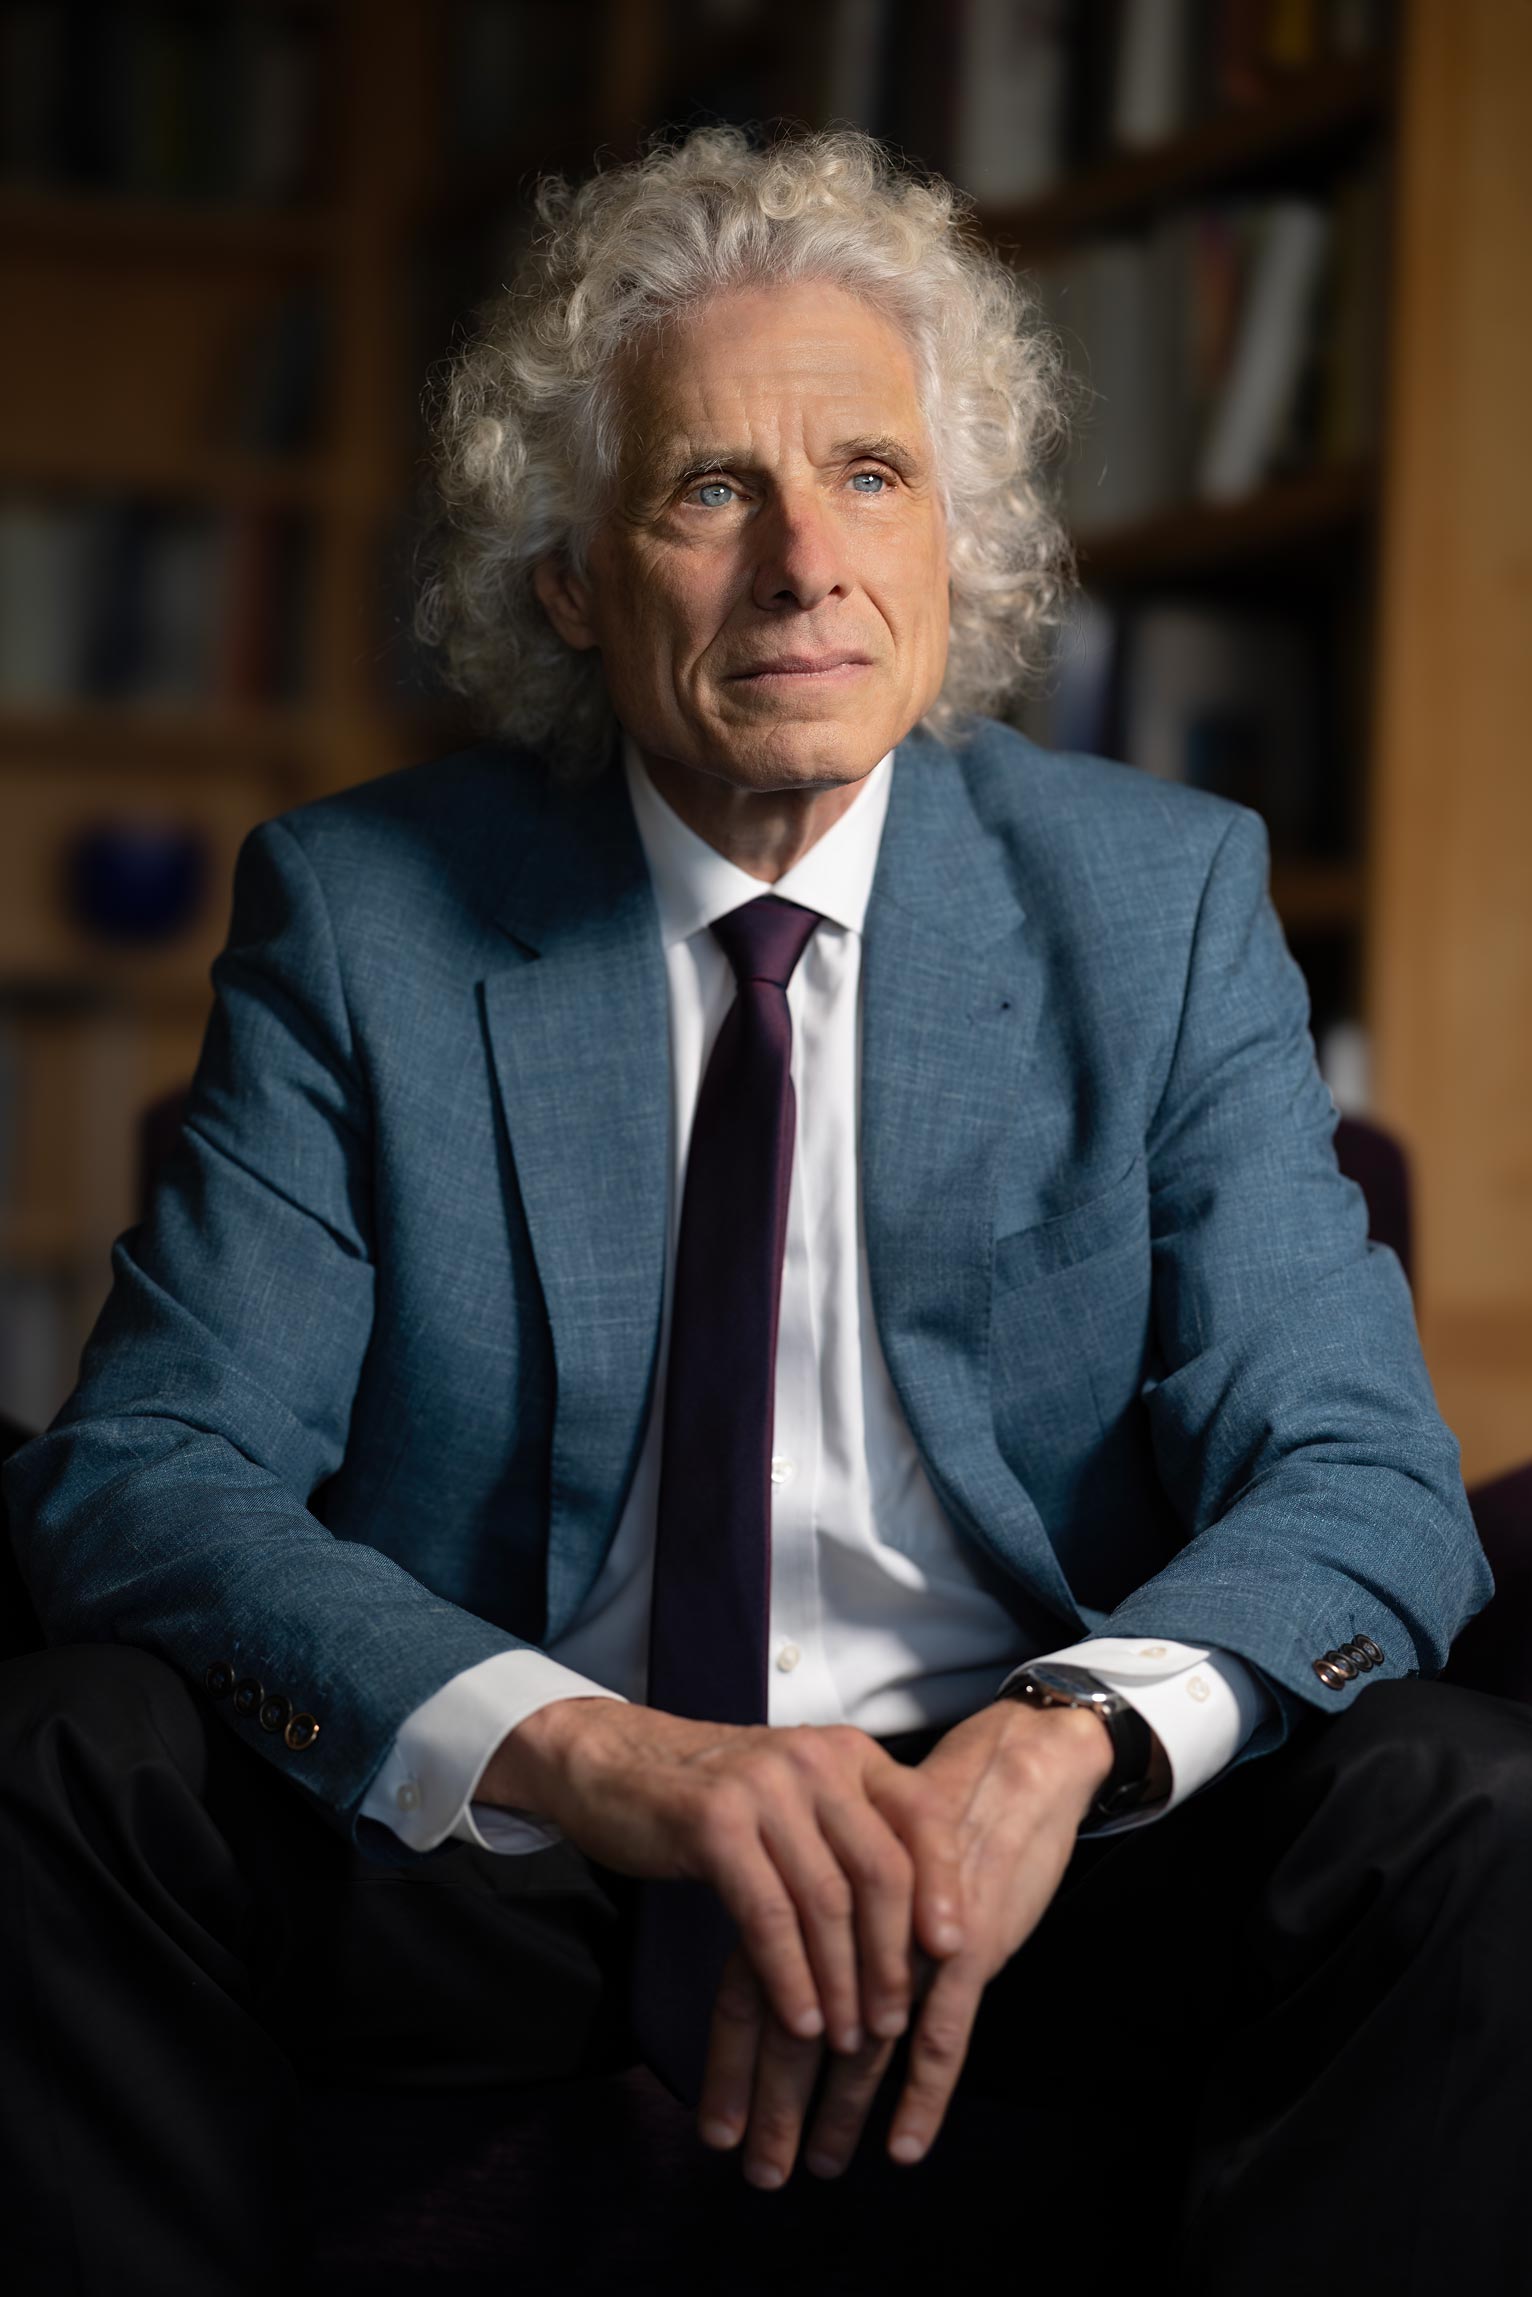 Steven Pinker bases his confidence on data: “I don’t think of myself as an optimist.” © Christopher Michel / Wikipedia